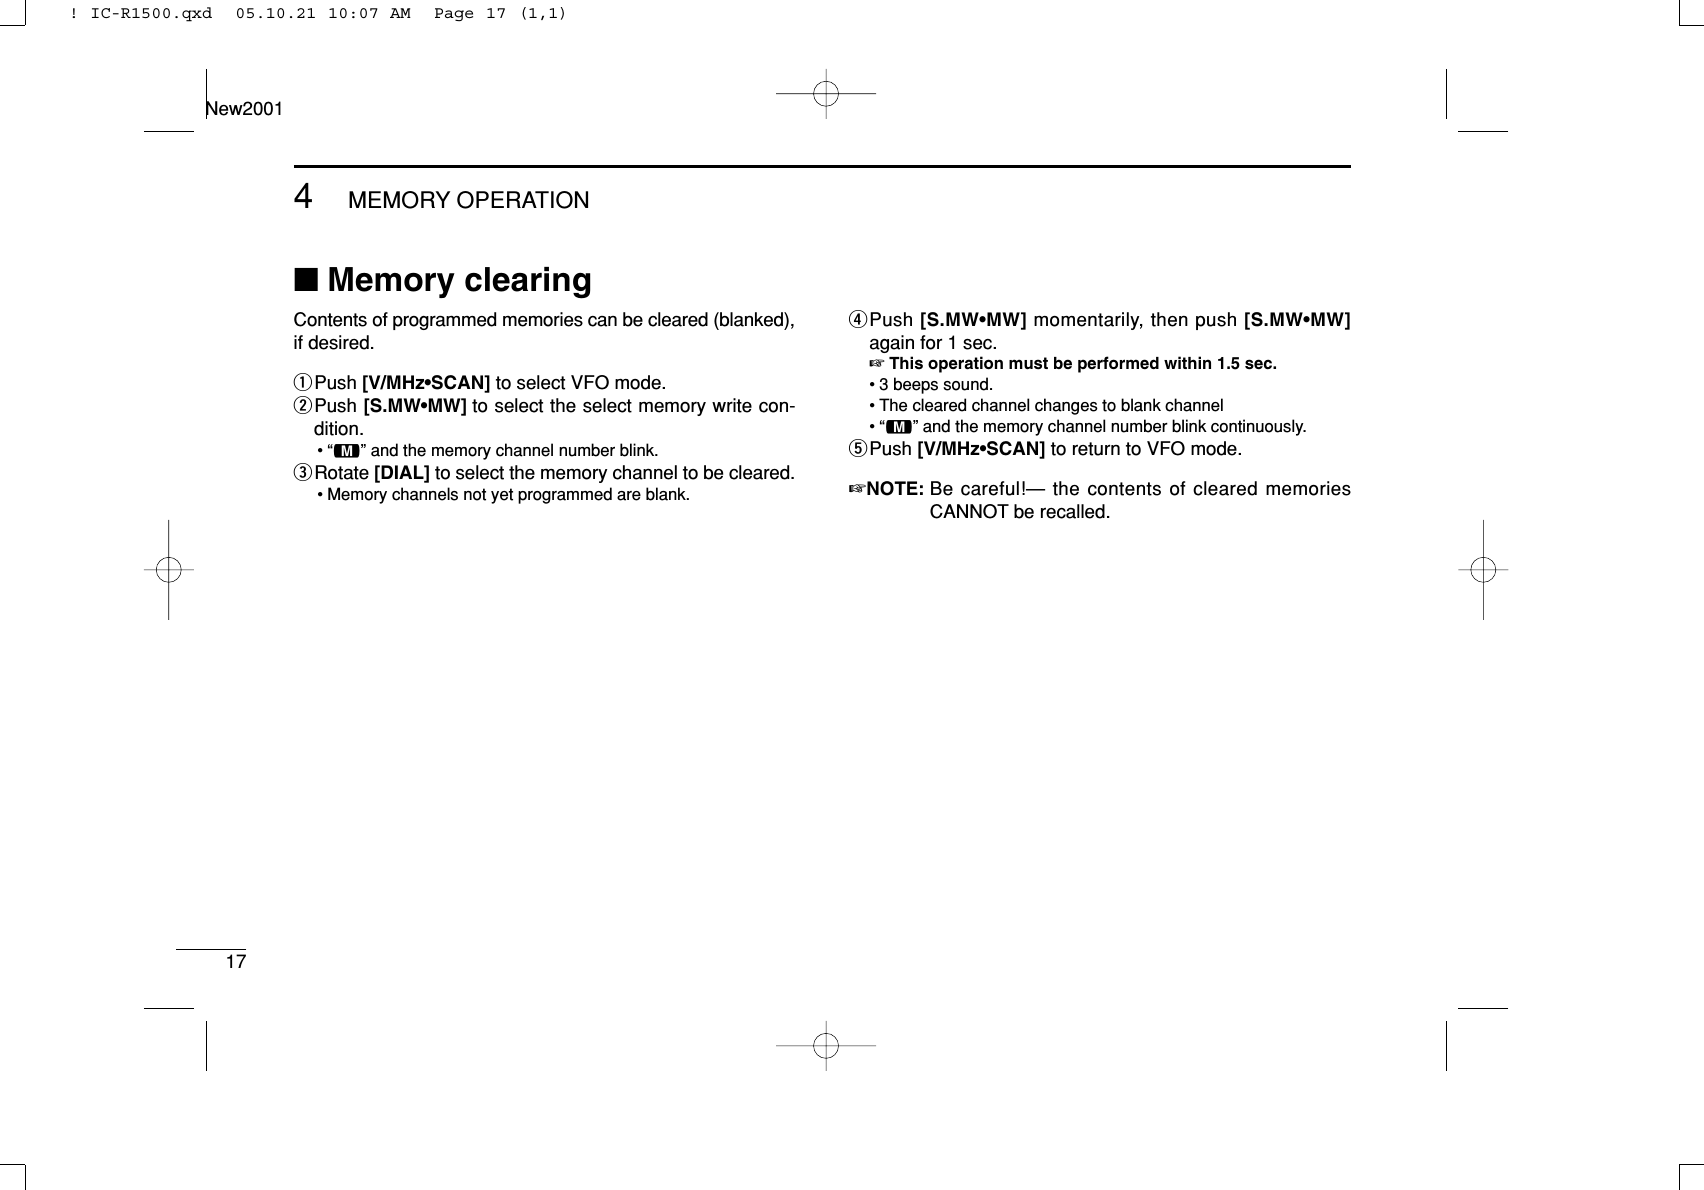 174MEMORY OPERATIONNew2001■Memory clearingContents of programmed memories can be cleared (blanked),if desired.qPush [V/MHz•SCAN] to select VFO mode.wPush [S.MW•MW] to select the select memory write con-dition.•“!” and the memory channel number blink.eRotate [DIAL] to select the memory channel to be cleared.• Memory channels not yet programmed are blank.rPush [S.MW•MW] momentarily, then push [S.MW•MW]again for 1 sec.☞This operation must be performed within 1.5 sec.• 3 beeps sound.• The cleared channel changes to blank channel•“!” and the memory channel number blink continuously.tPush [V/MHz•SCAN] to return to VFO mode.☞NOTE: Be careful!— the contents of cleared memoriesCANNOT be recalled.! IC-R1500.qxd  05.10.21 10:07 AM  Page 17 (1,1)